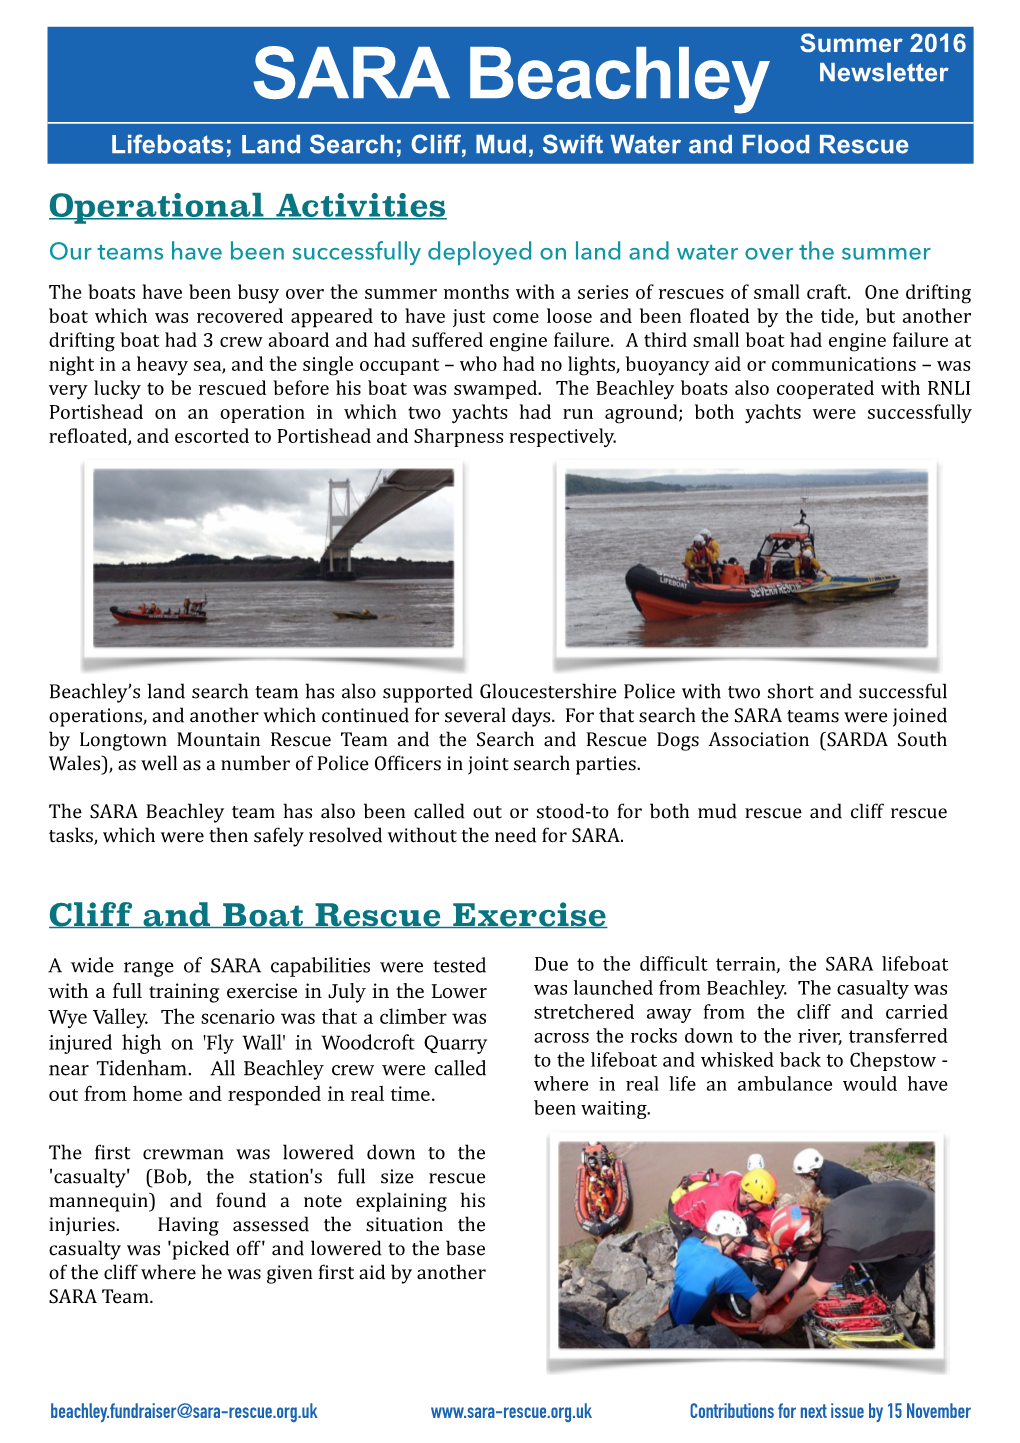 Summer 2016 SARA Beachley Newsletter Lifeboats; Land Search; Cliff, Mud, Swift Water and Flood Rescue